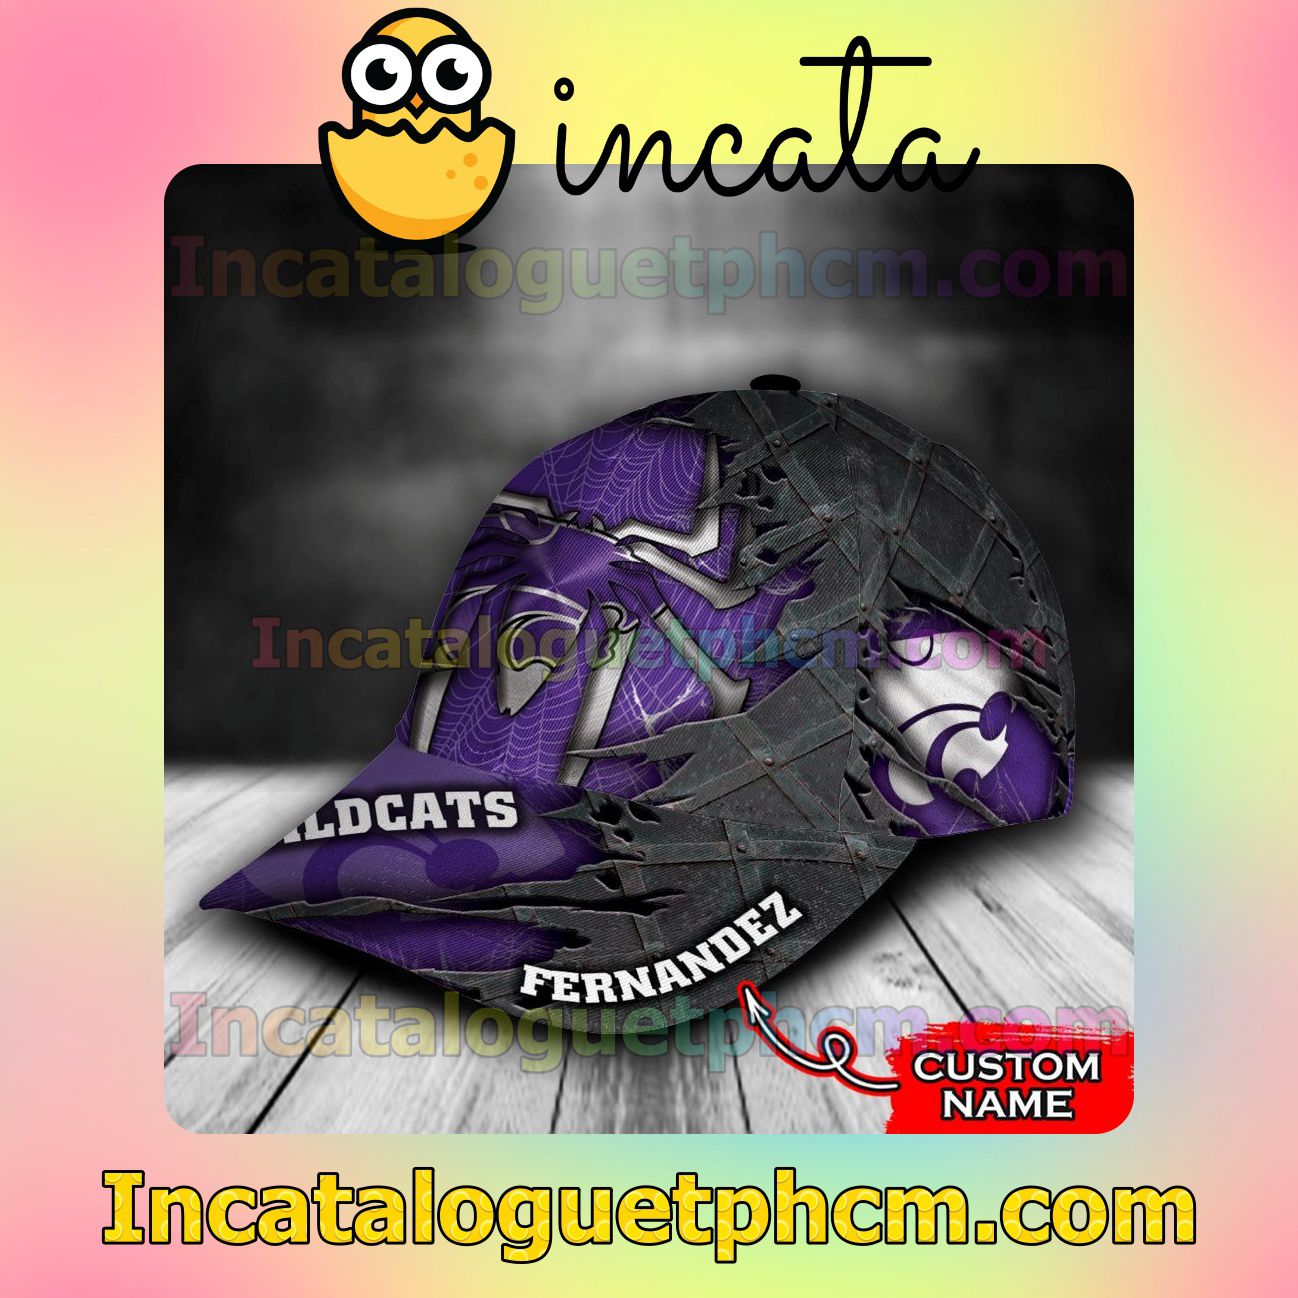 Sale Off Kansas State Wildcats Spiderman NCAA Customized Hat Caps